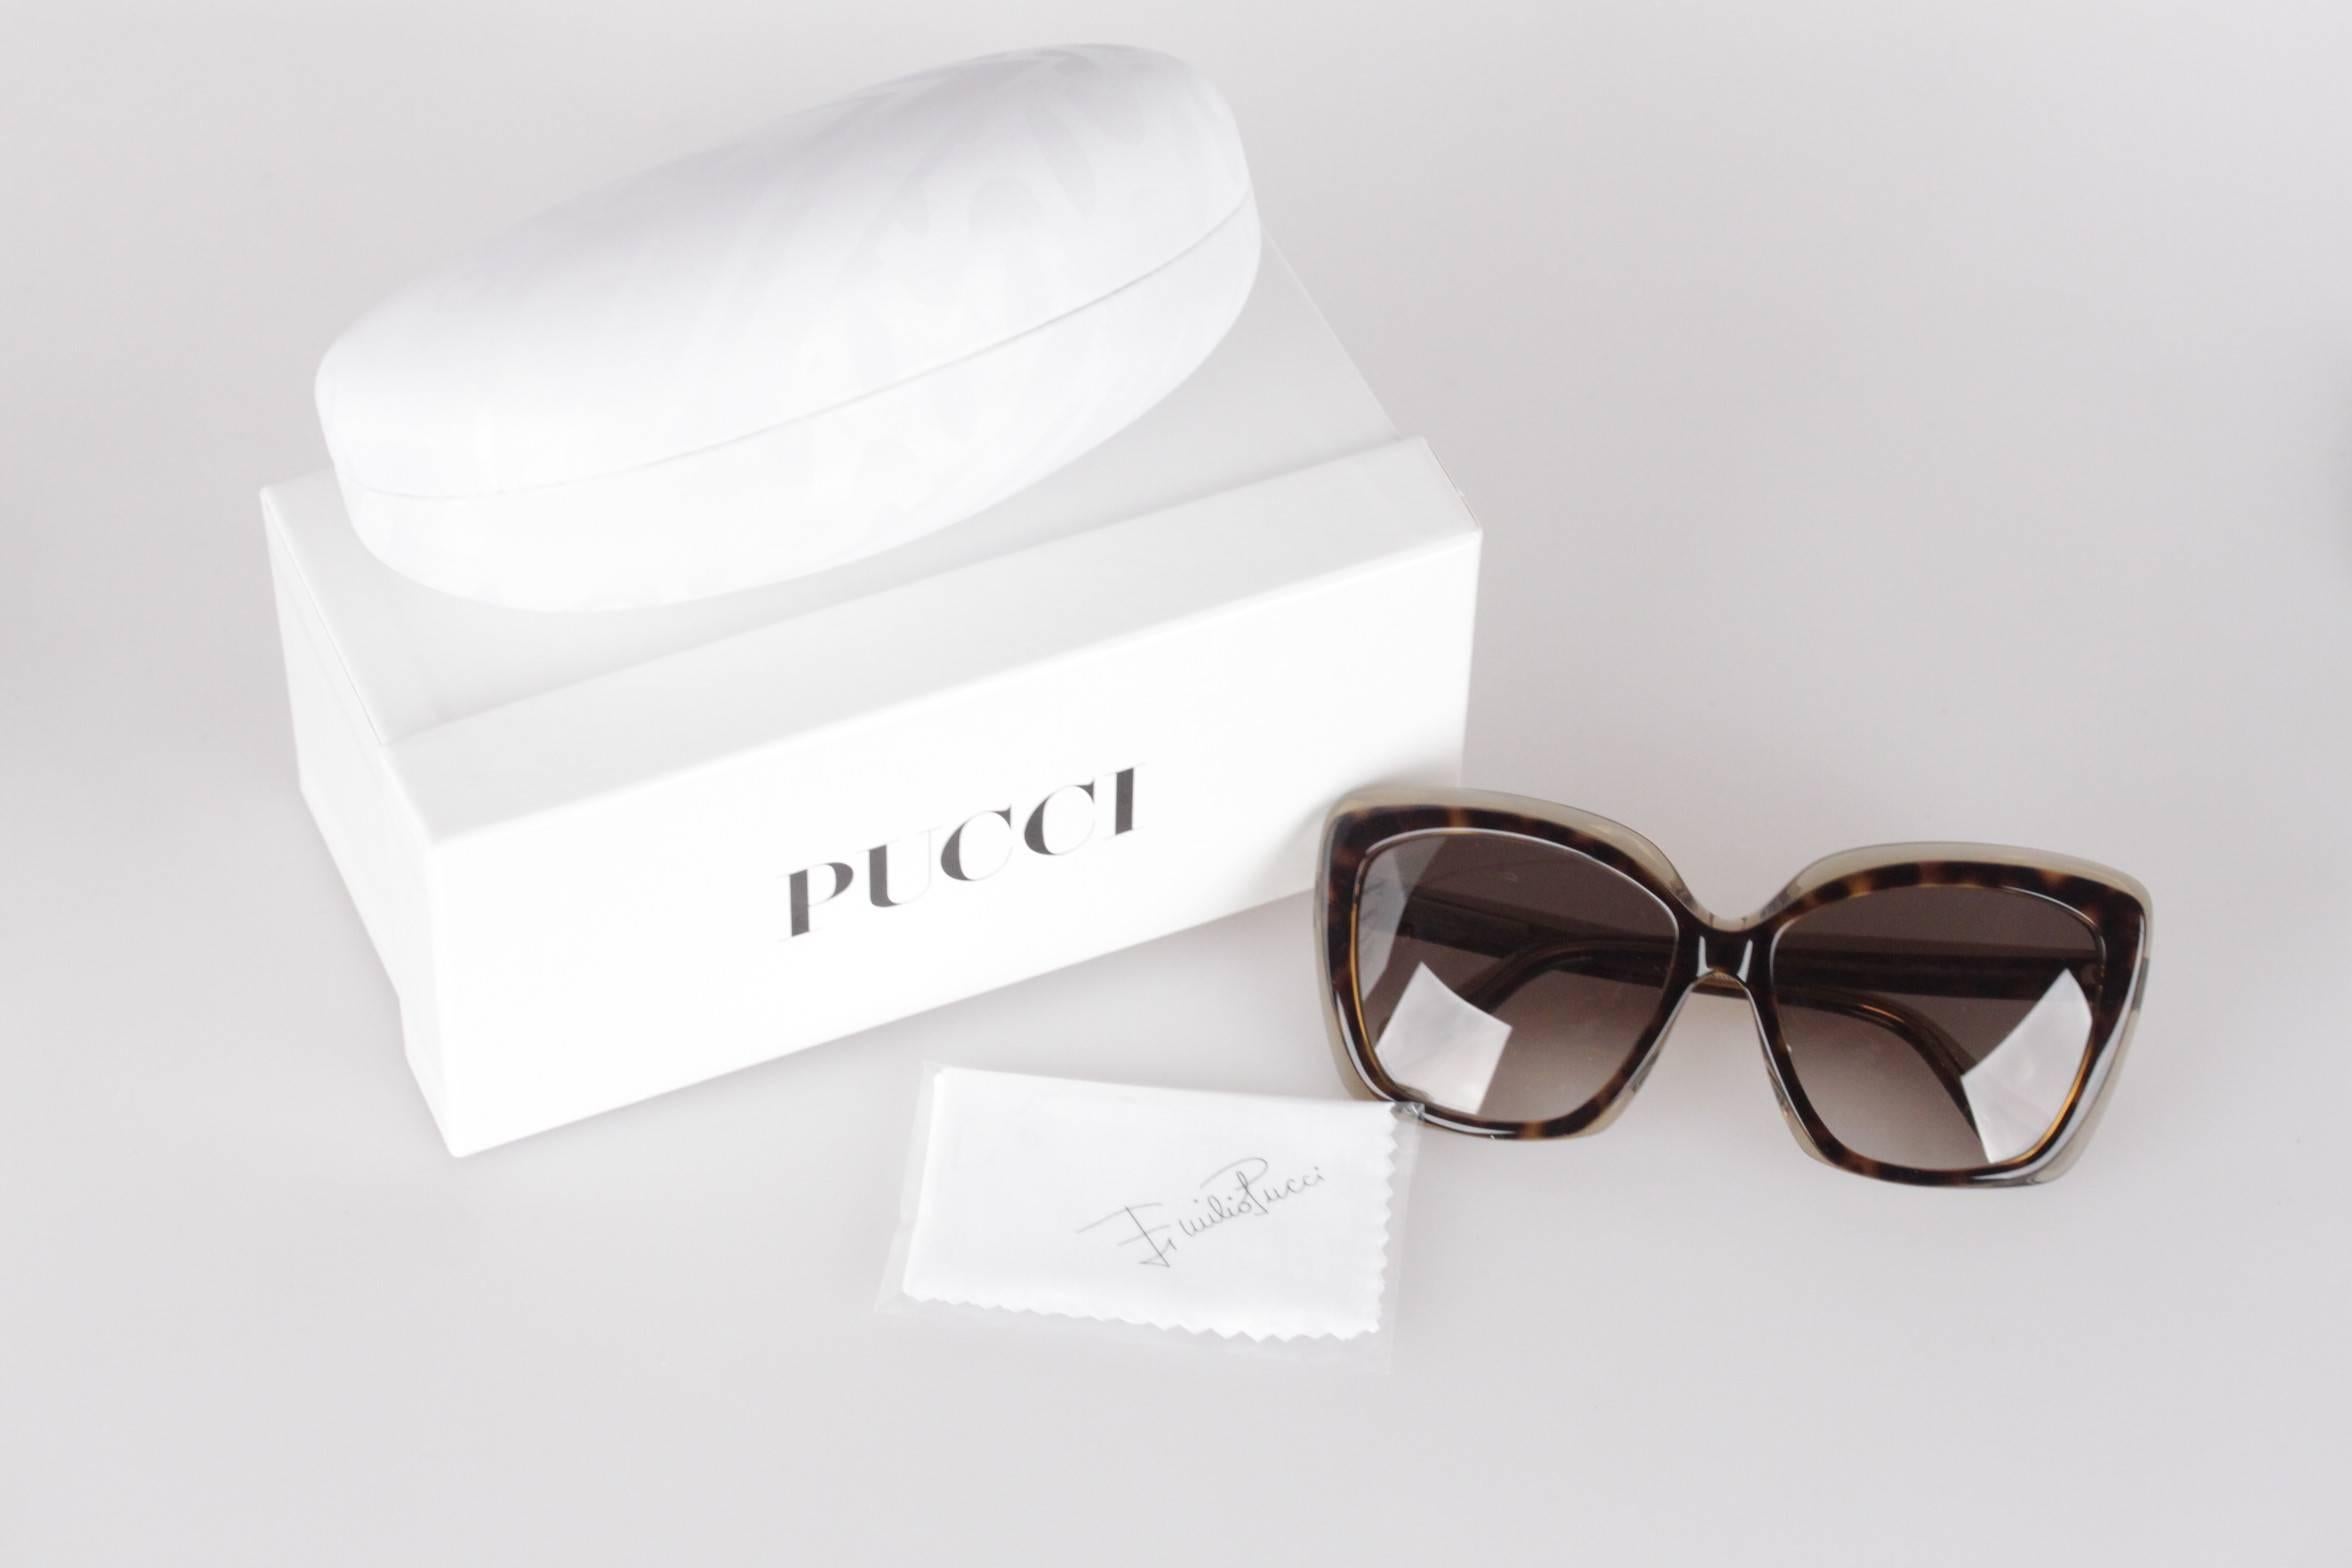 NEW, MINT & BOXED!

EMILIO PUCCI sunglasses, Made in Italy

Tortoise Brown, Black & Gold OVERSIZED, CAT-EYE sunglasses

2014 collection - Retail Price: over 300 USD

Light brown GRADIENT lenses

Model refs: EP 720S - 57/16 - 244 -